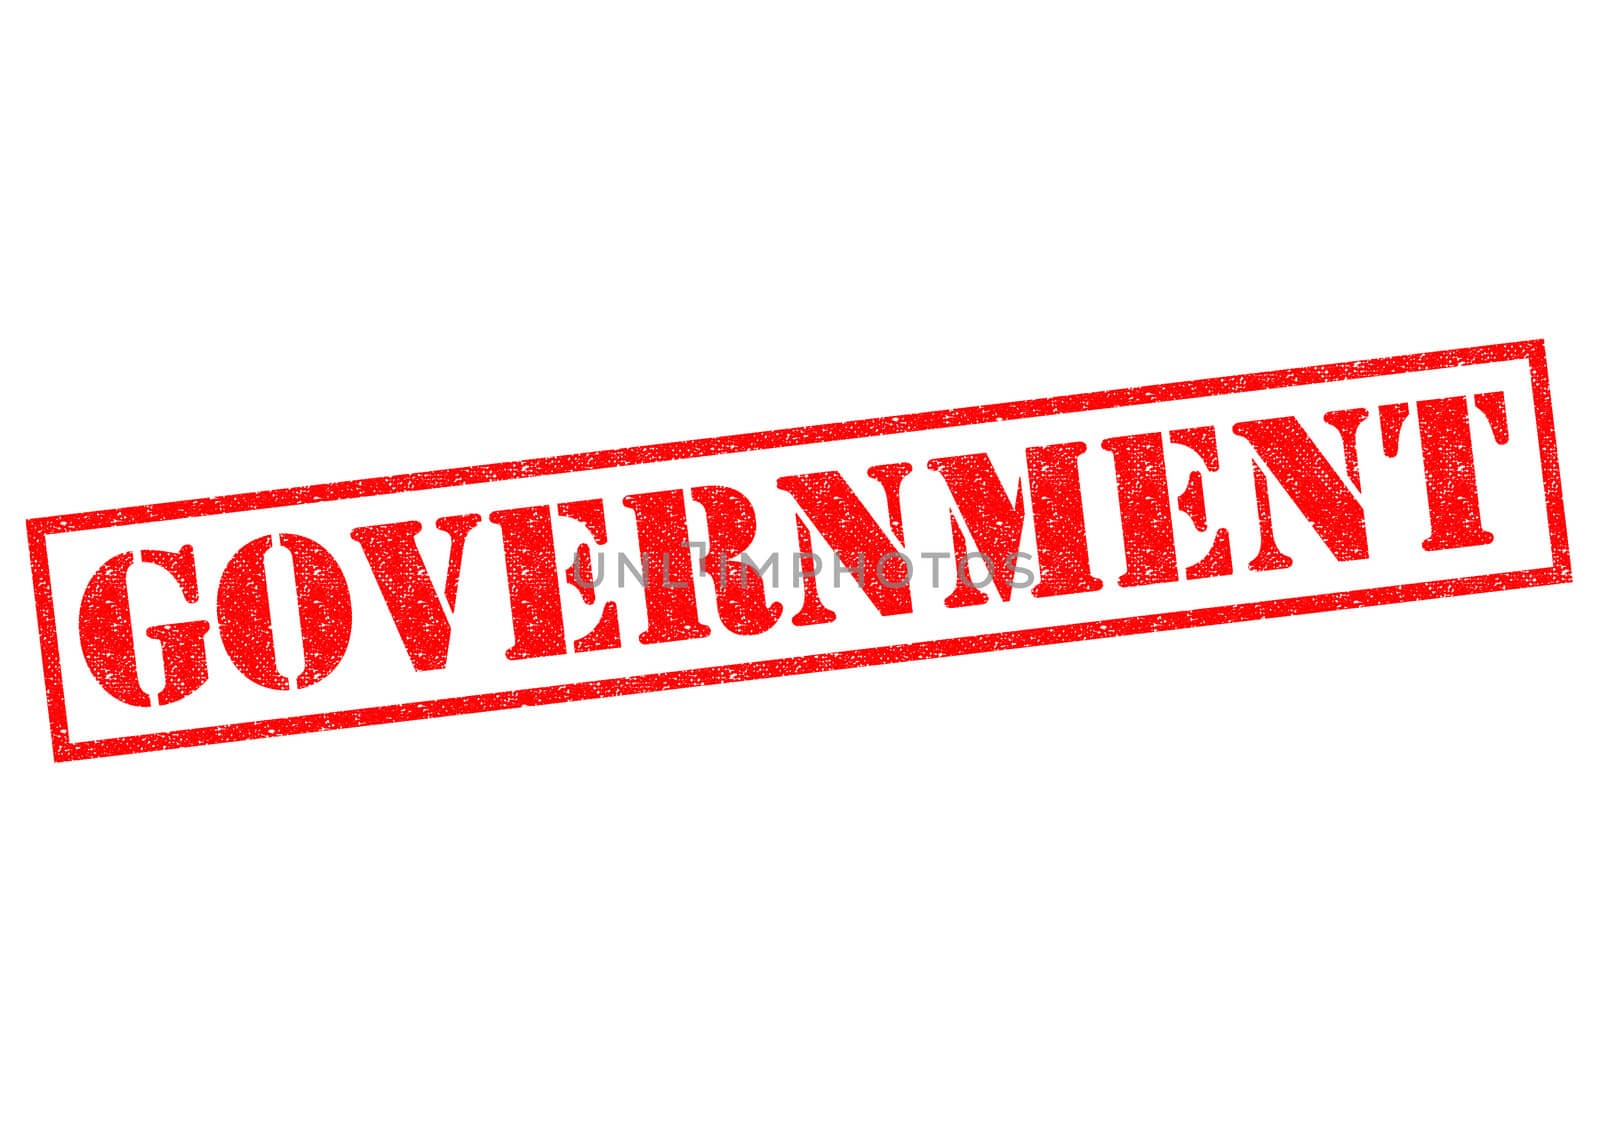 GOVERNMENT red Rubber Stamp over a white background.